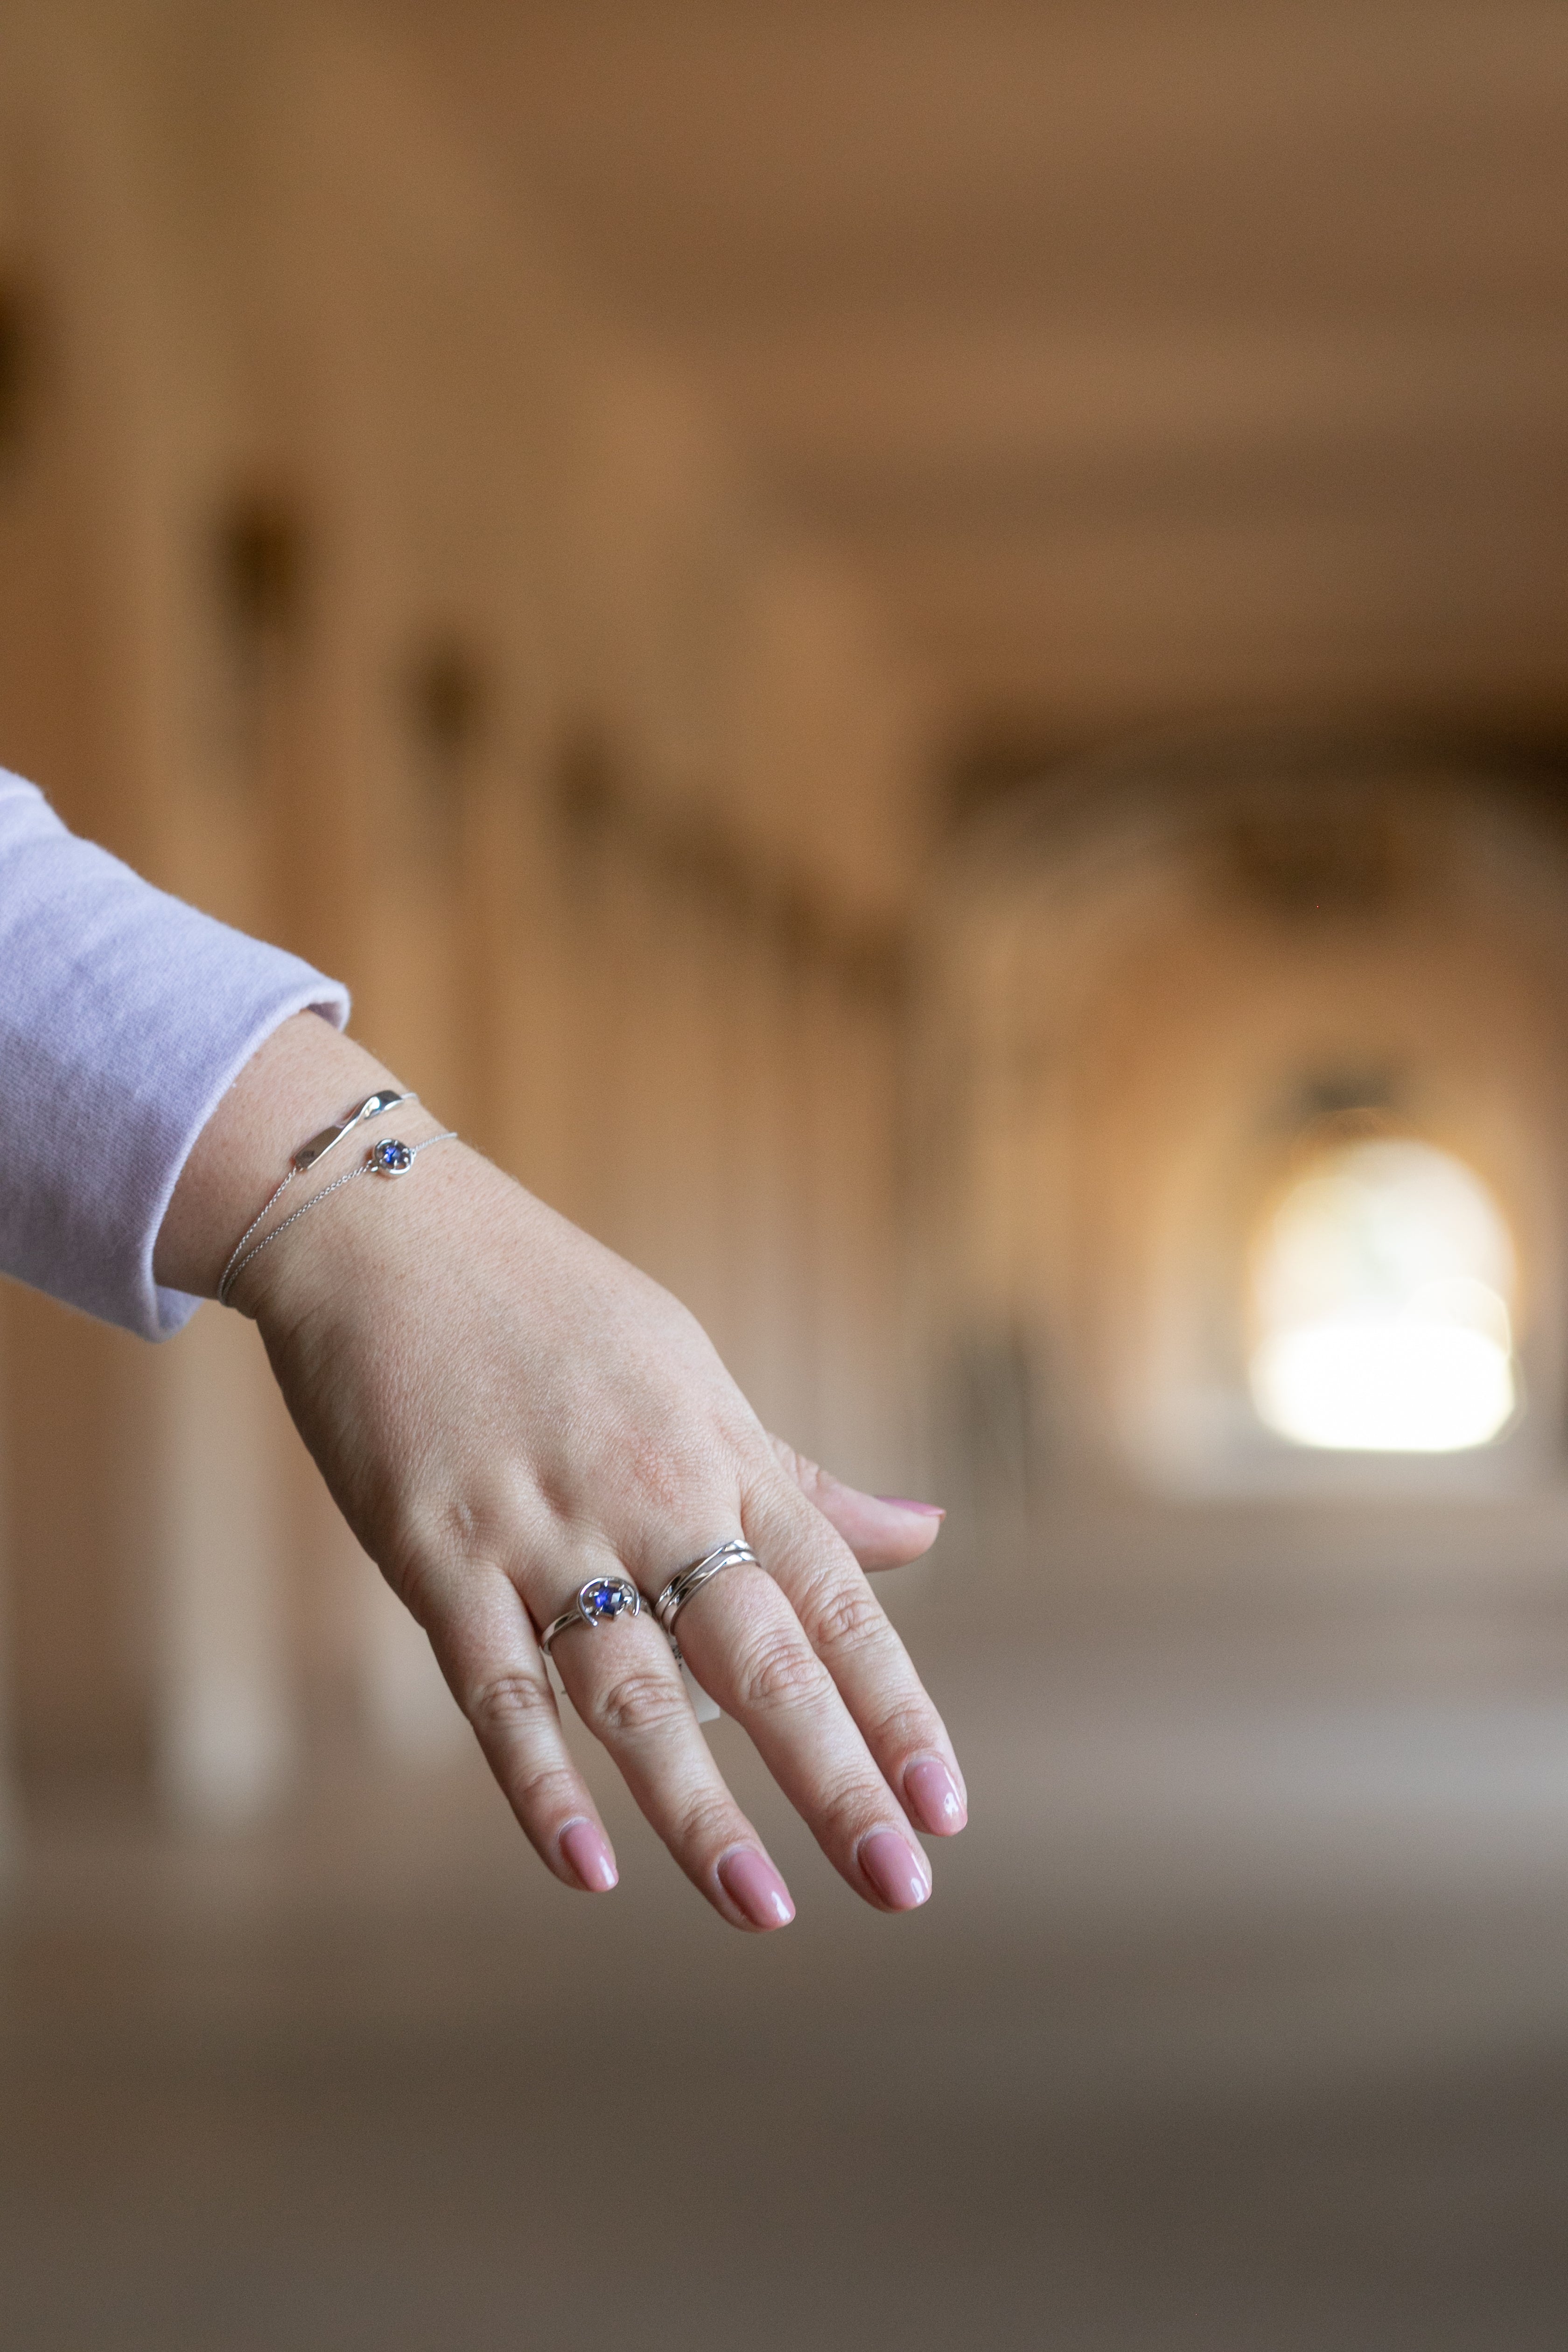 A hand with a hallway in the background. There are two silver stacked twist rings on the middle finger, a silver and tanzanite gemstone ring on the ring finger and two silver bracelets on the wrist. Plus size and size inclusive rings and bracelets.